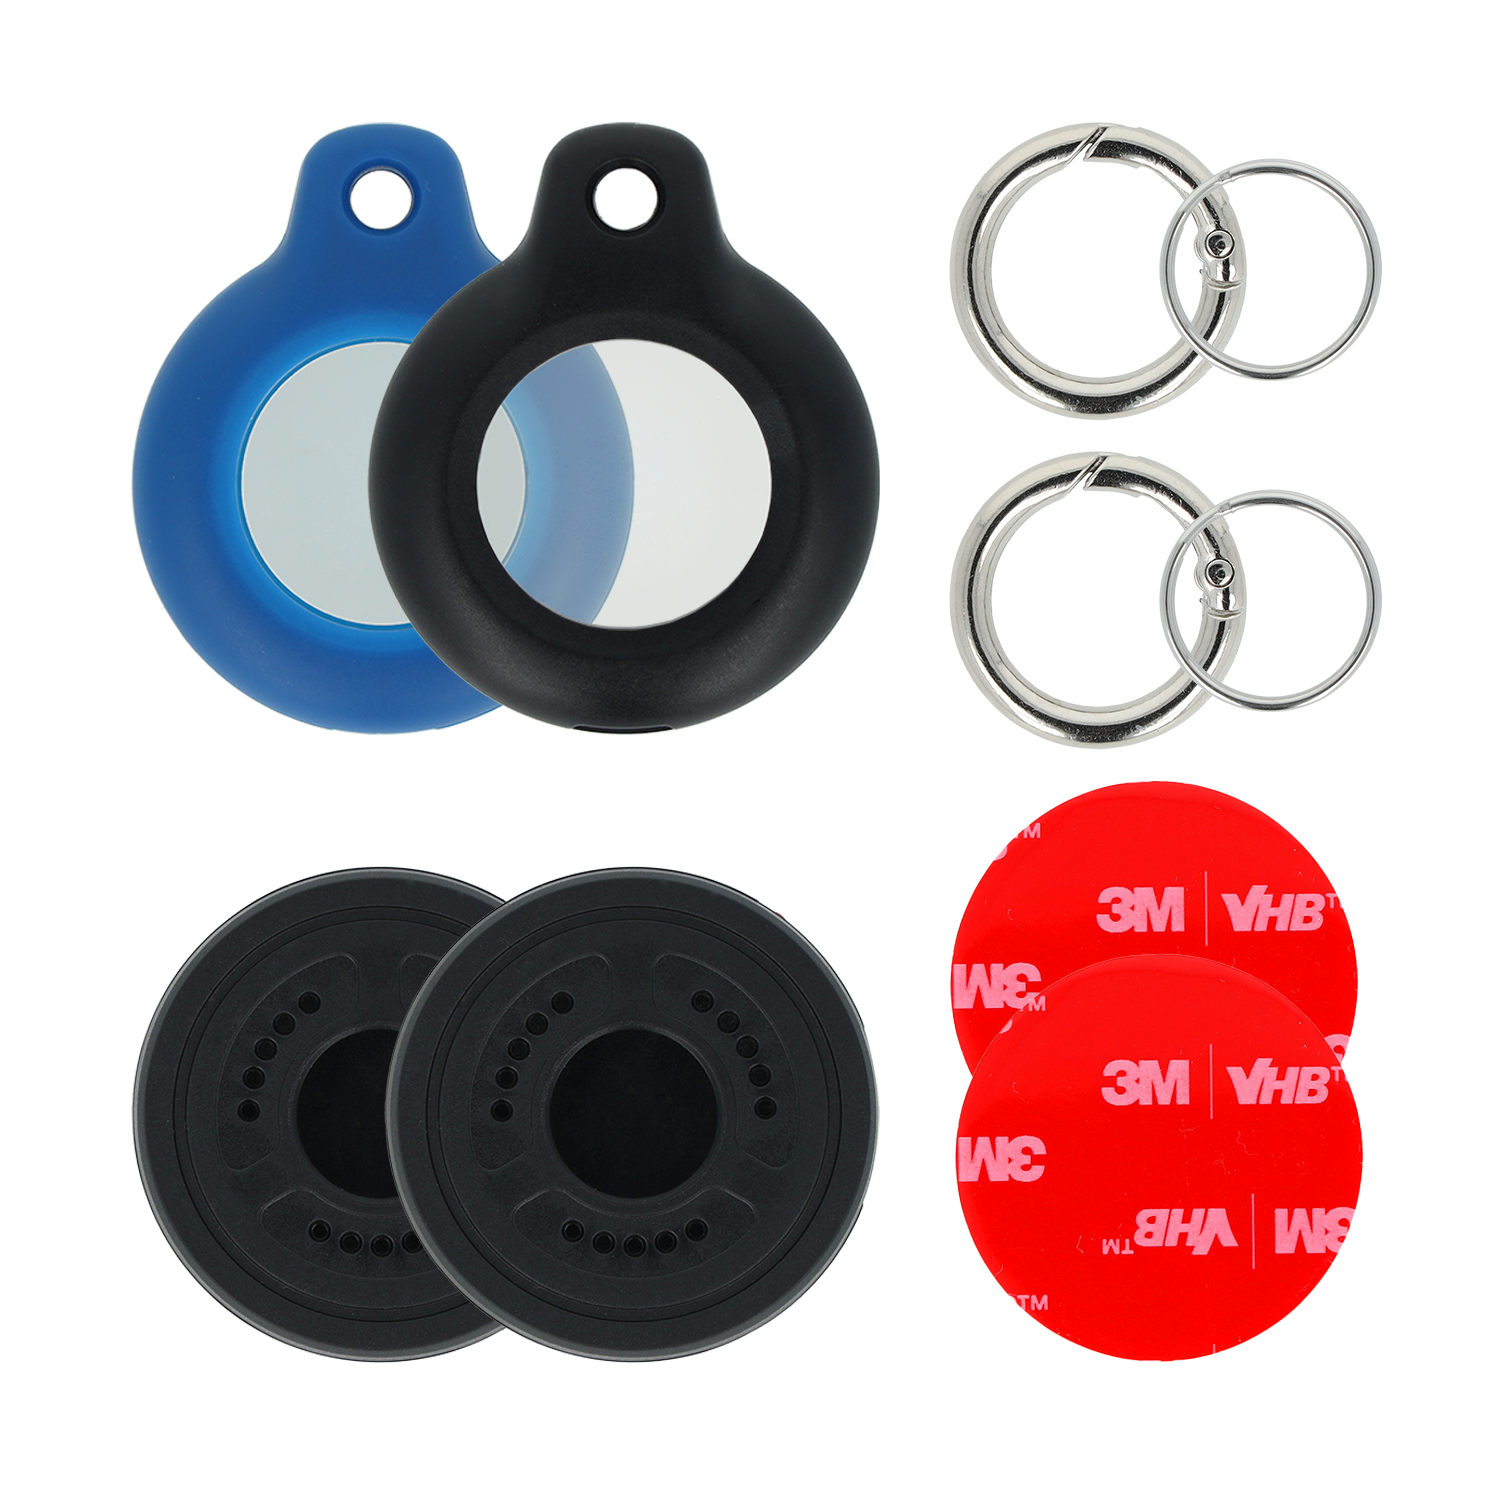 The 4smarts Apple AirTag case is bundled with a high quality VHB adhesive tape from 3M and all matching key rings.